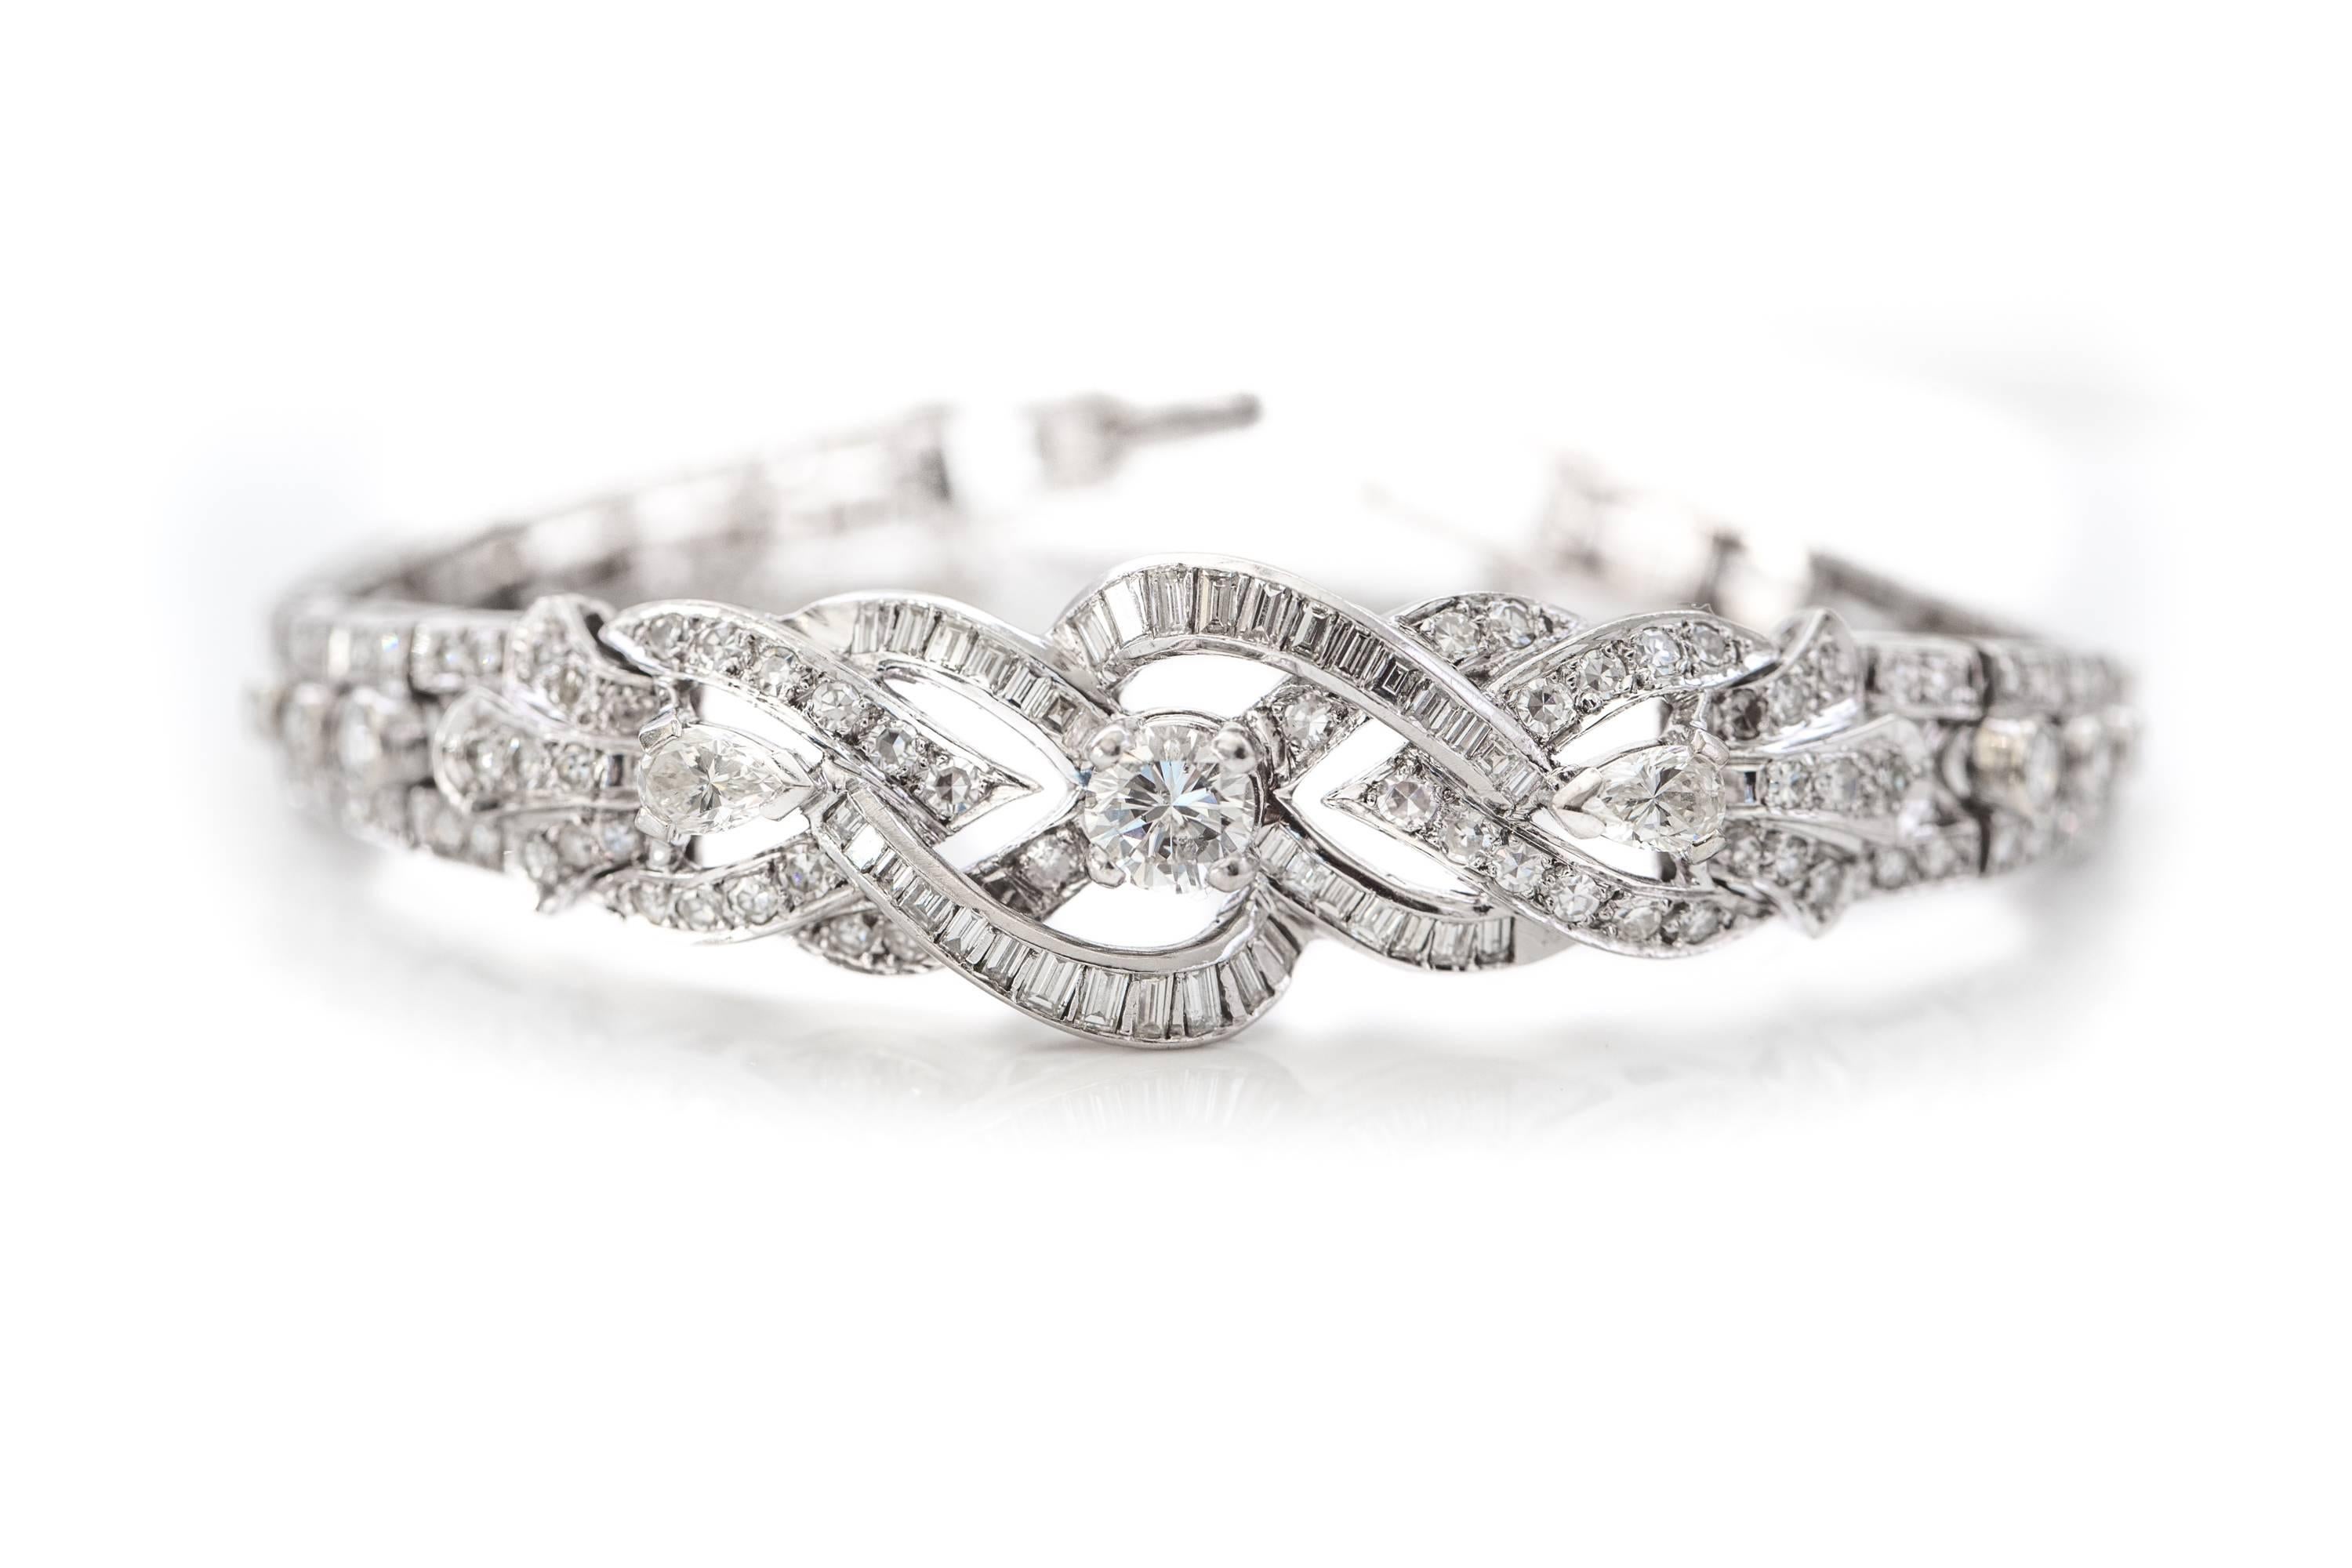 1950s Retro Diamond and 14K White Gold Bracelet. The primary section features a .65 carat Center Diamond set atop the center of an infinity shape set with baguette and round diamonds. A baguette-set half-heart sits to the upper left and lower right